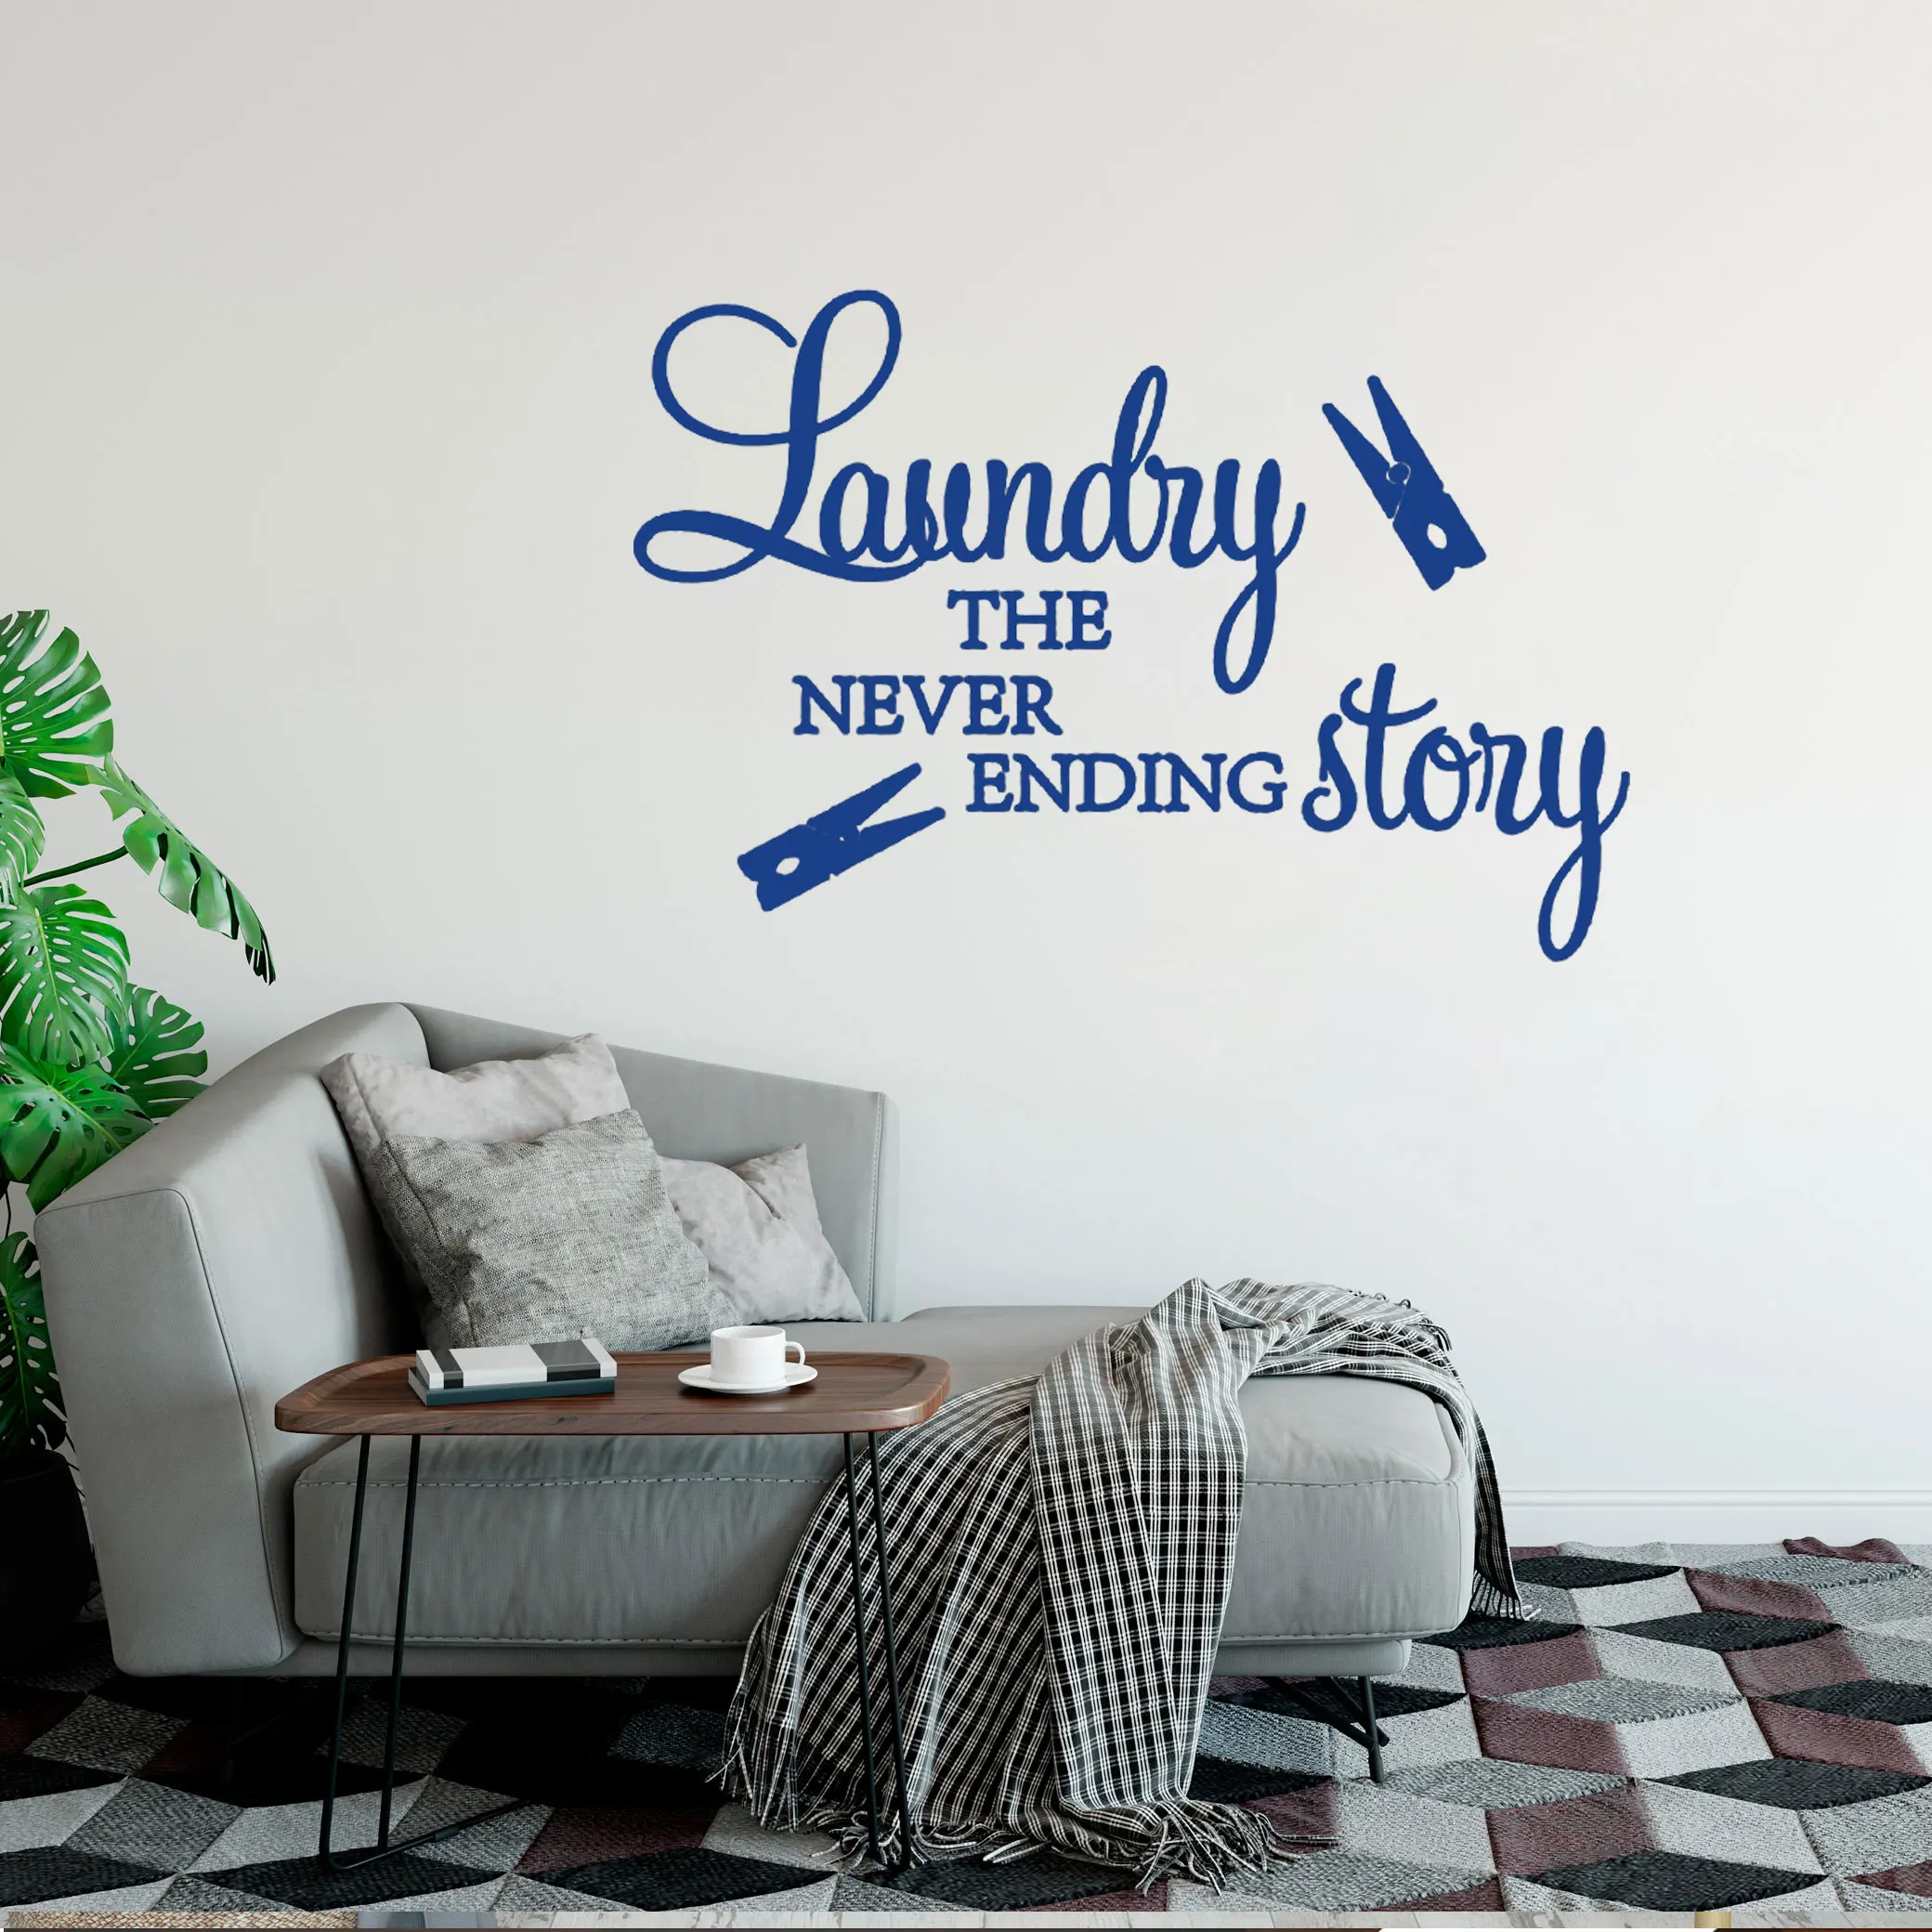 

Laundry Room Quote Removable Wallpoof Decoration Wallpaper Home Mural Decor Livingroom Wall Sticker CX2157